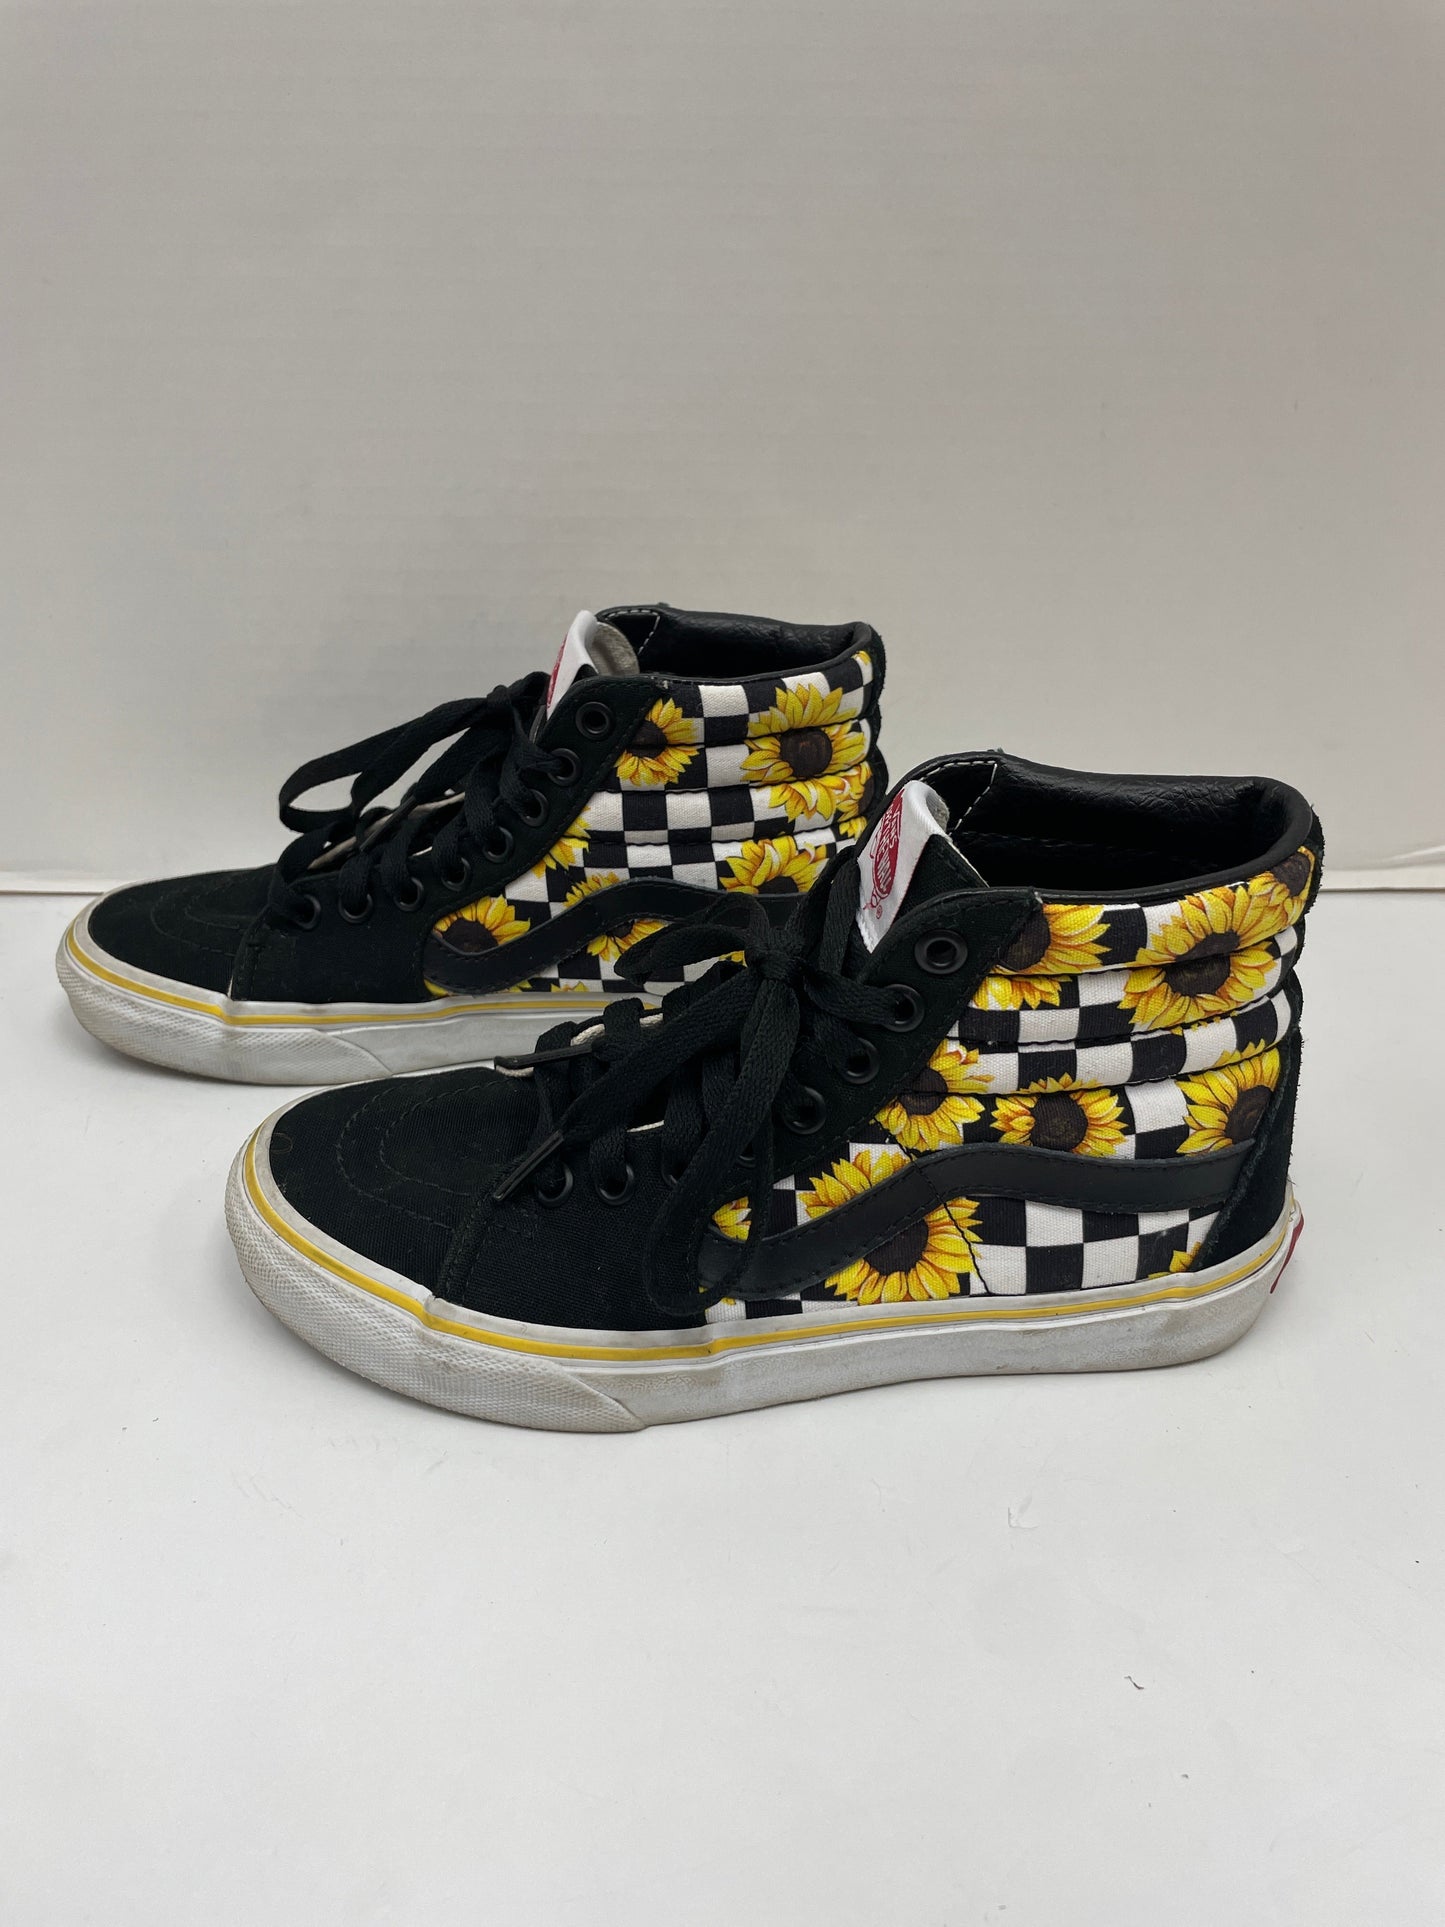 Shoes Sneakers By Vans  Size: 5.5